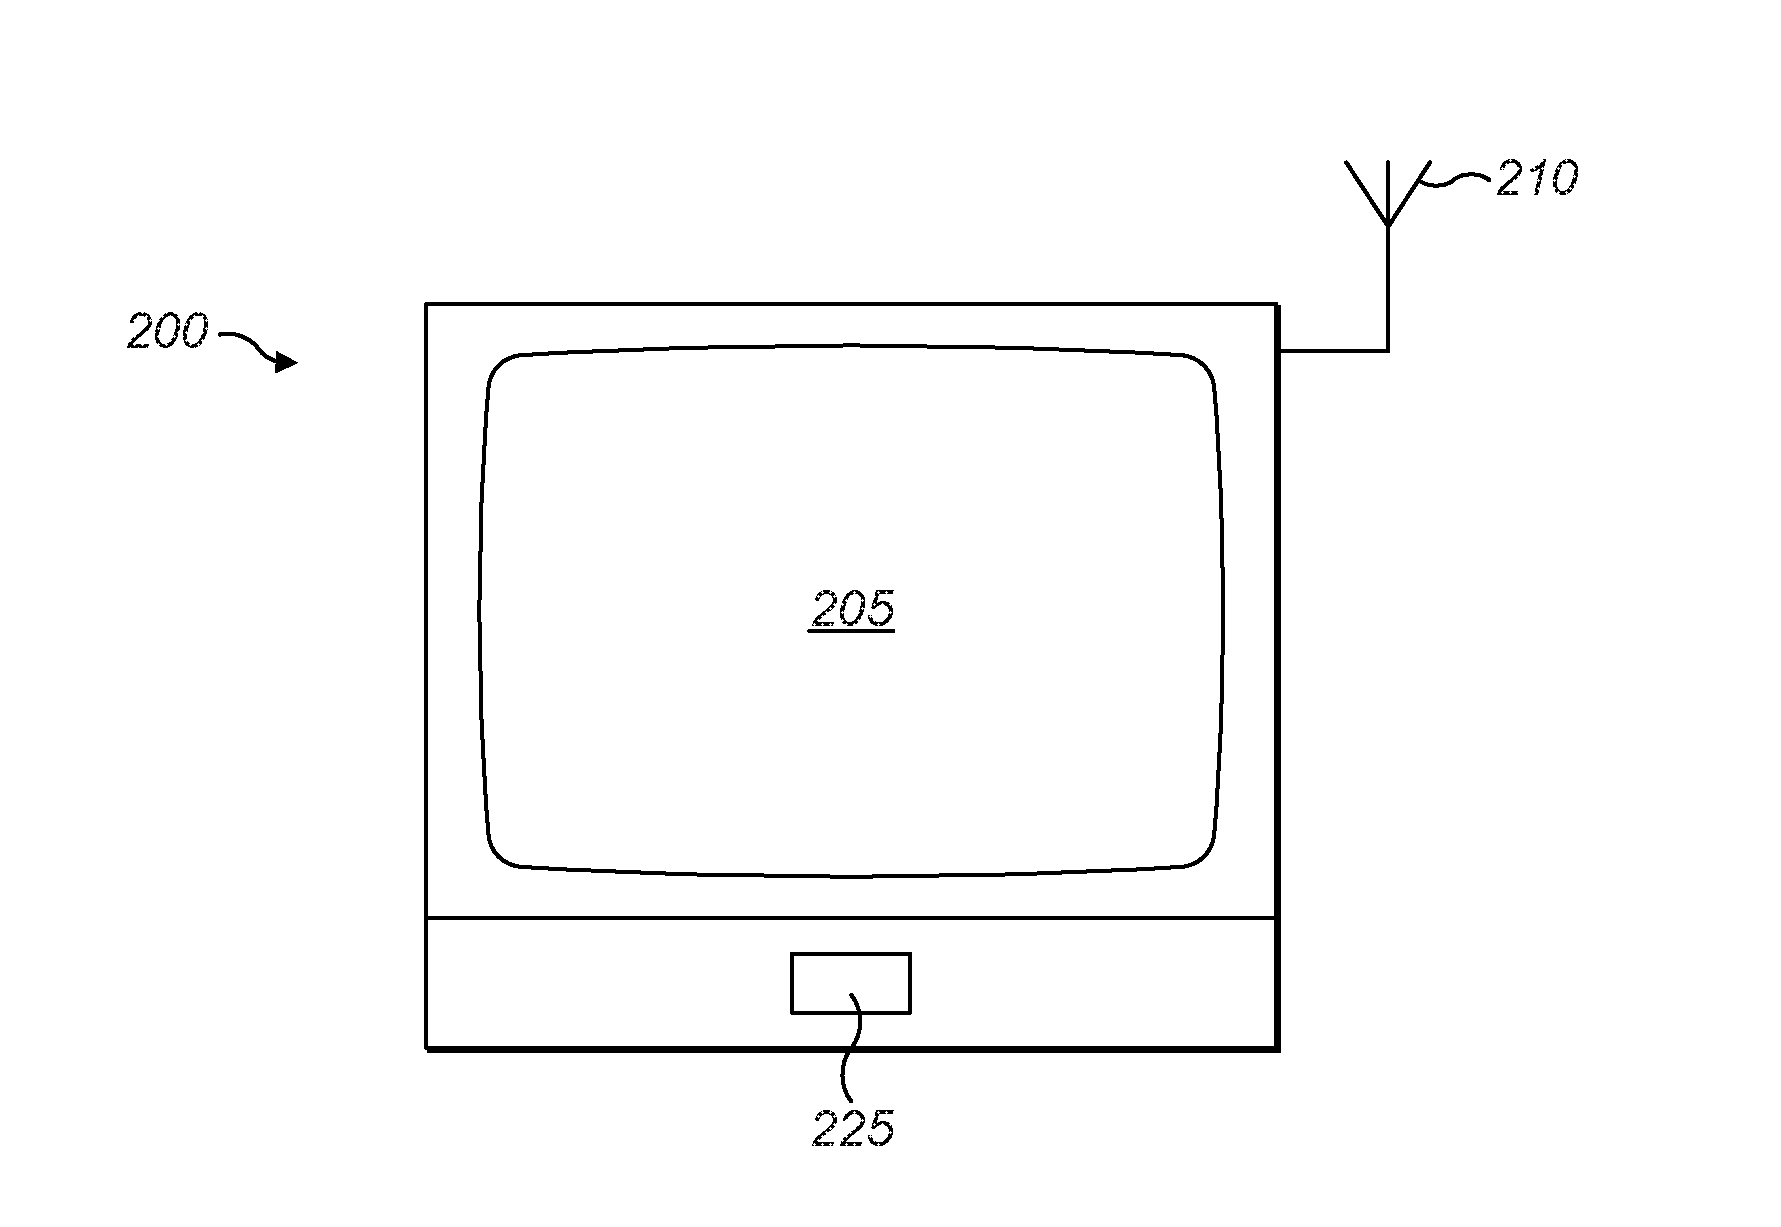 System for mounting an annular component on a shaft